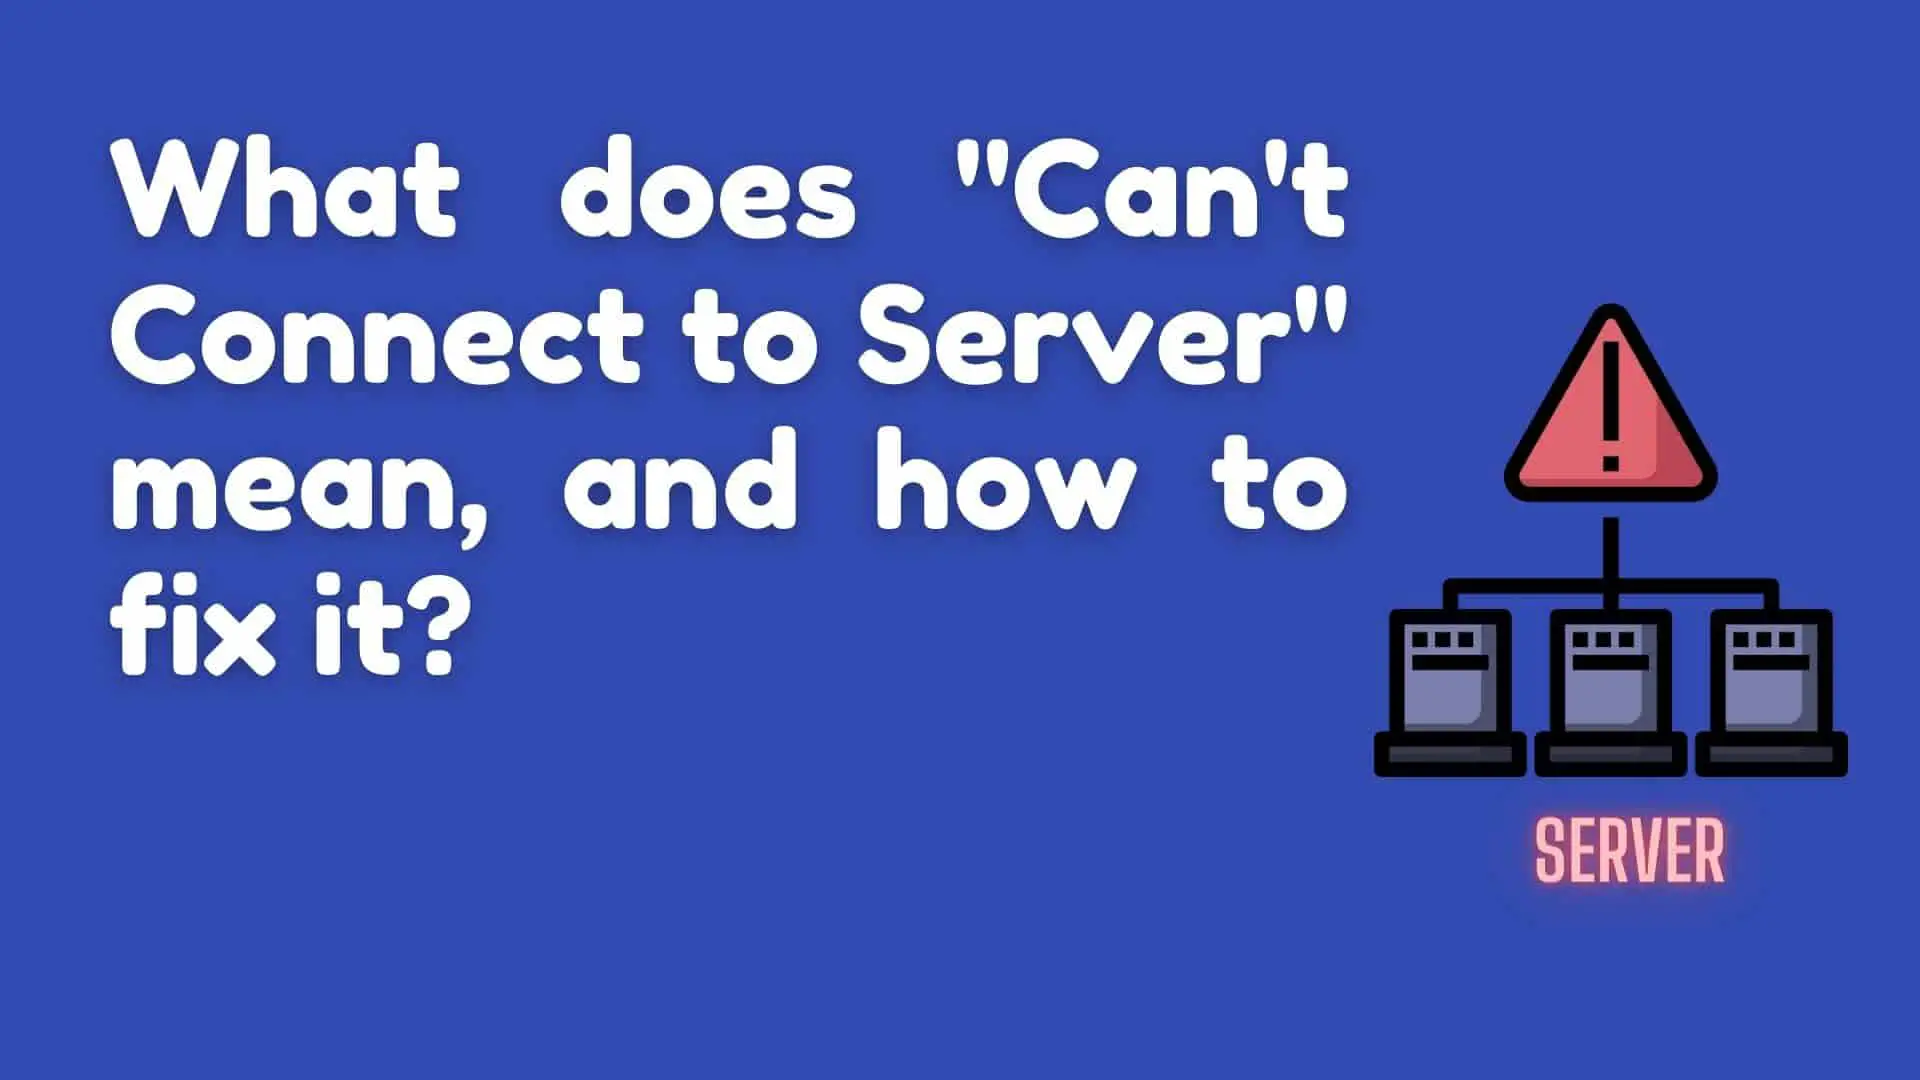 what-does-cannot-connect-to-server-means-how-to-fix-it